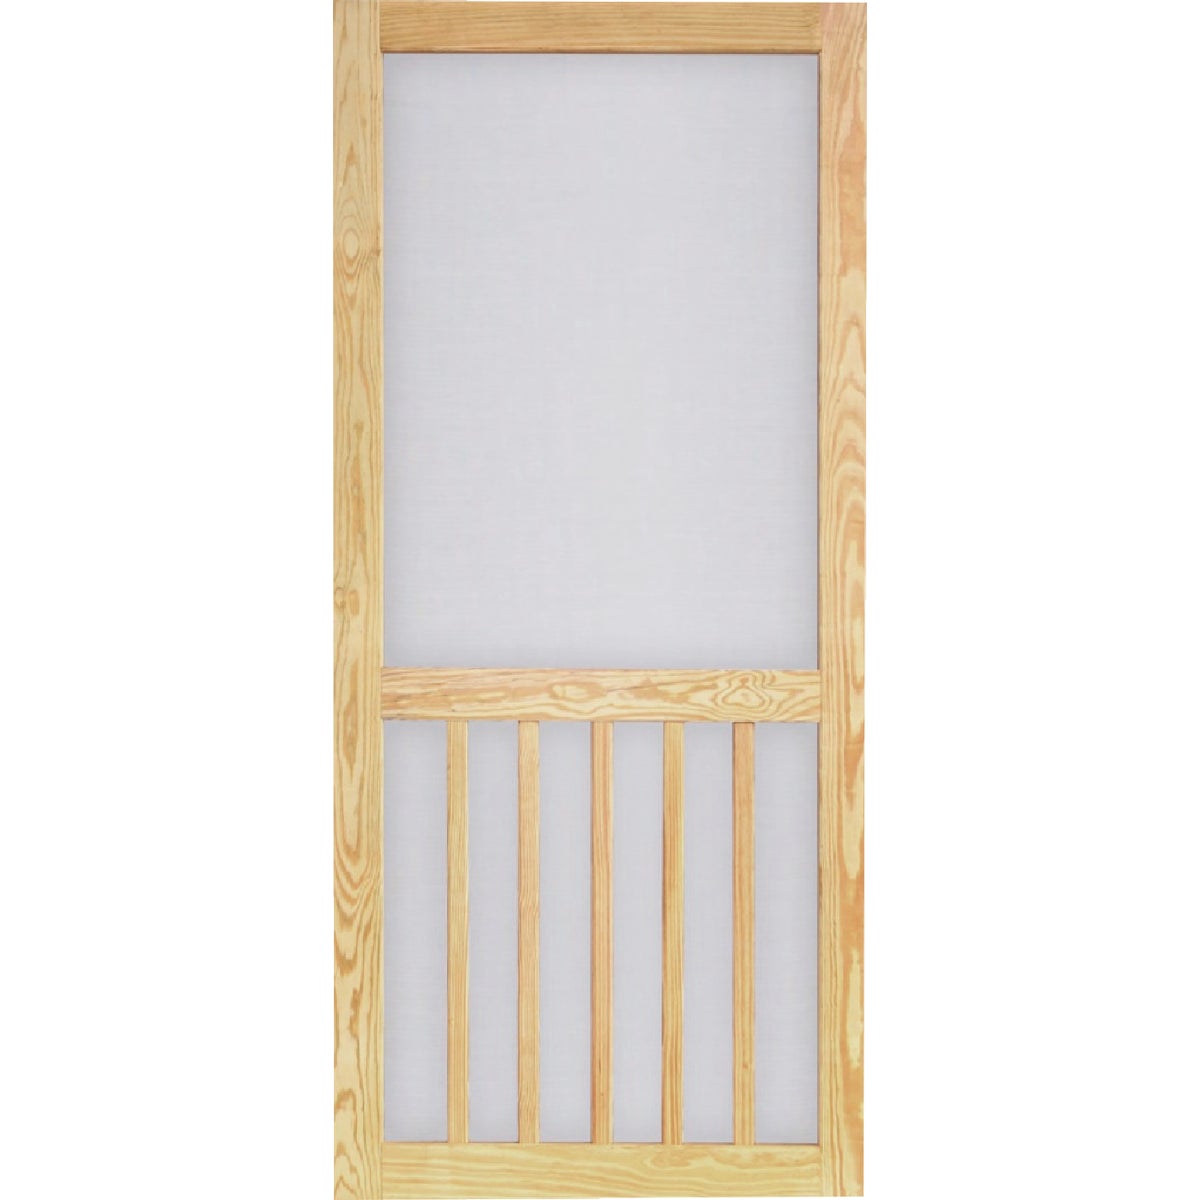 Screen Tight Timberline 36 In. W x 81 In. H x 1 In. Thick Pressure Treated Wood Screen Door